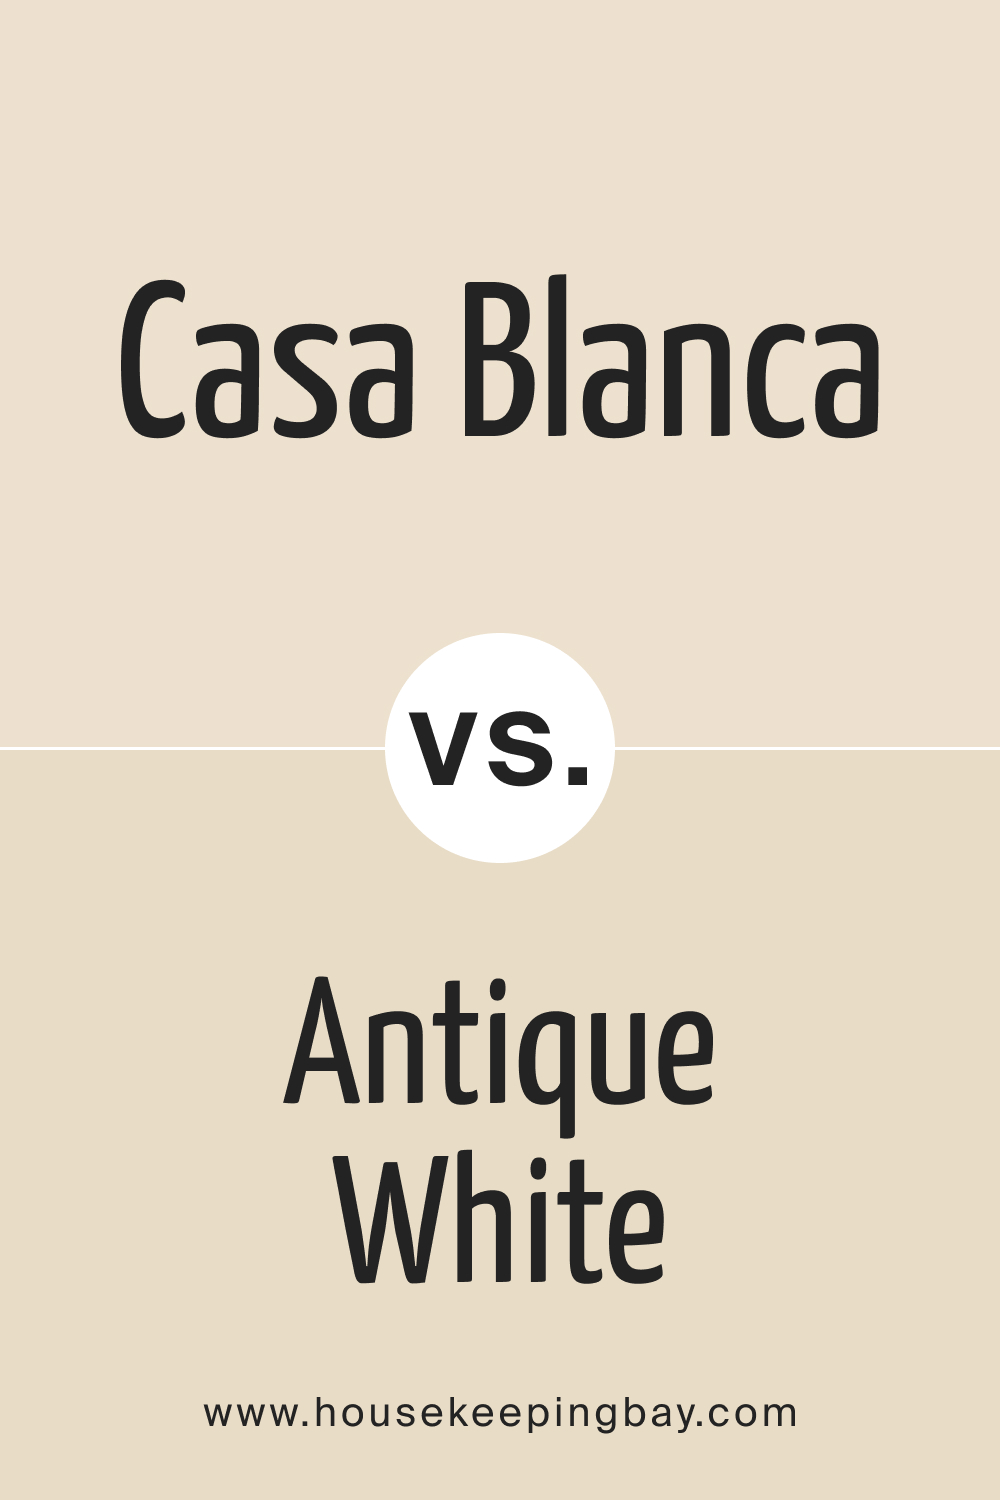 Casa Blanca 7571 Paint Color by Sherwin Williams VS Antique White